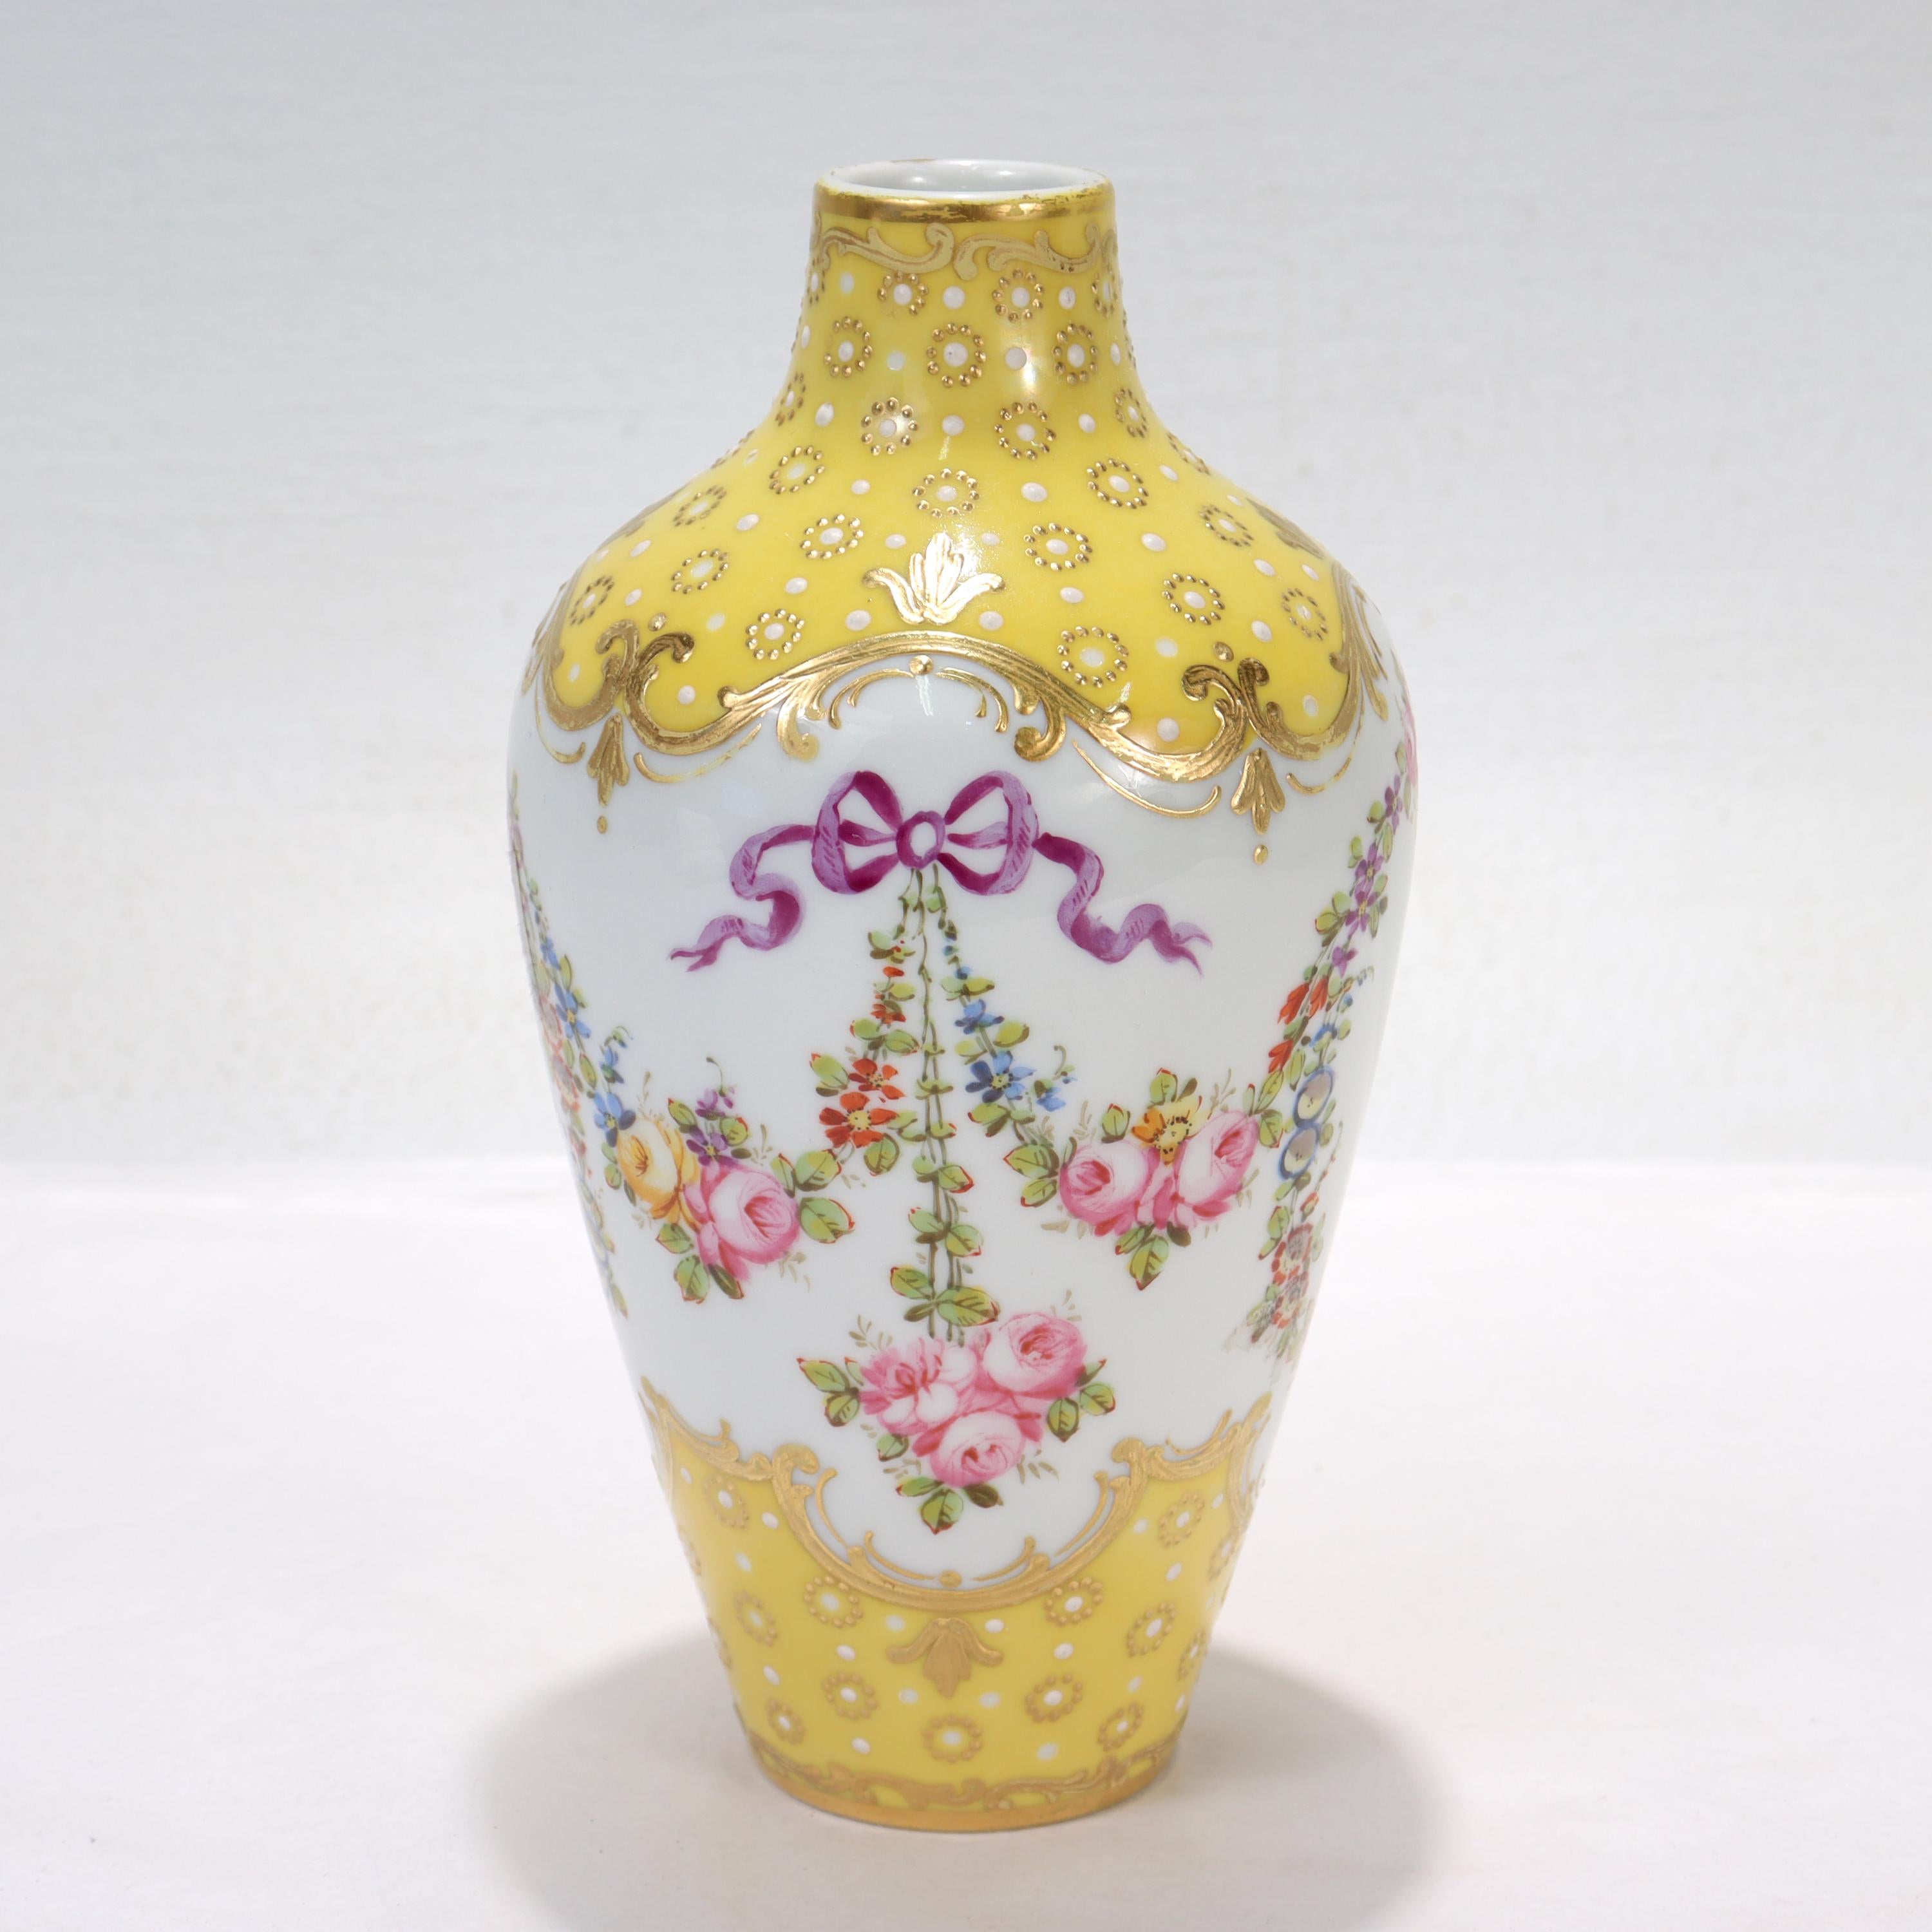 20th Century Antique French Sevres Type Yellow Ground Jeweled Vase with Garlands & Ribbons